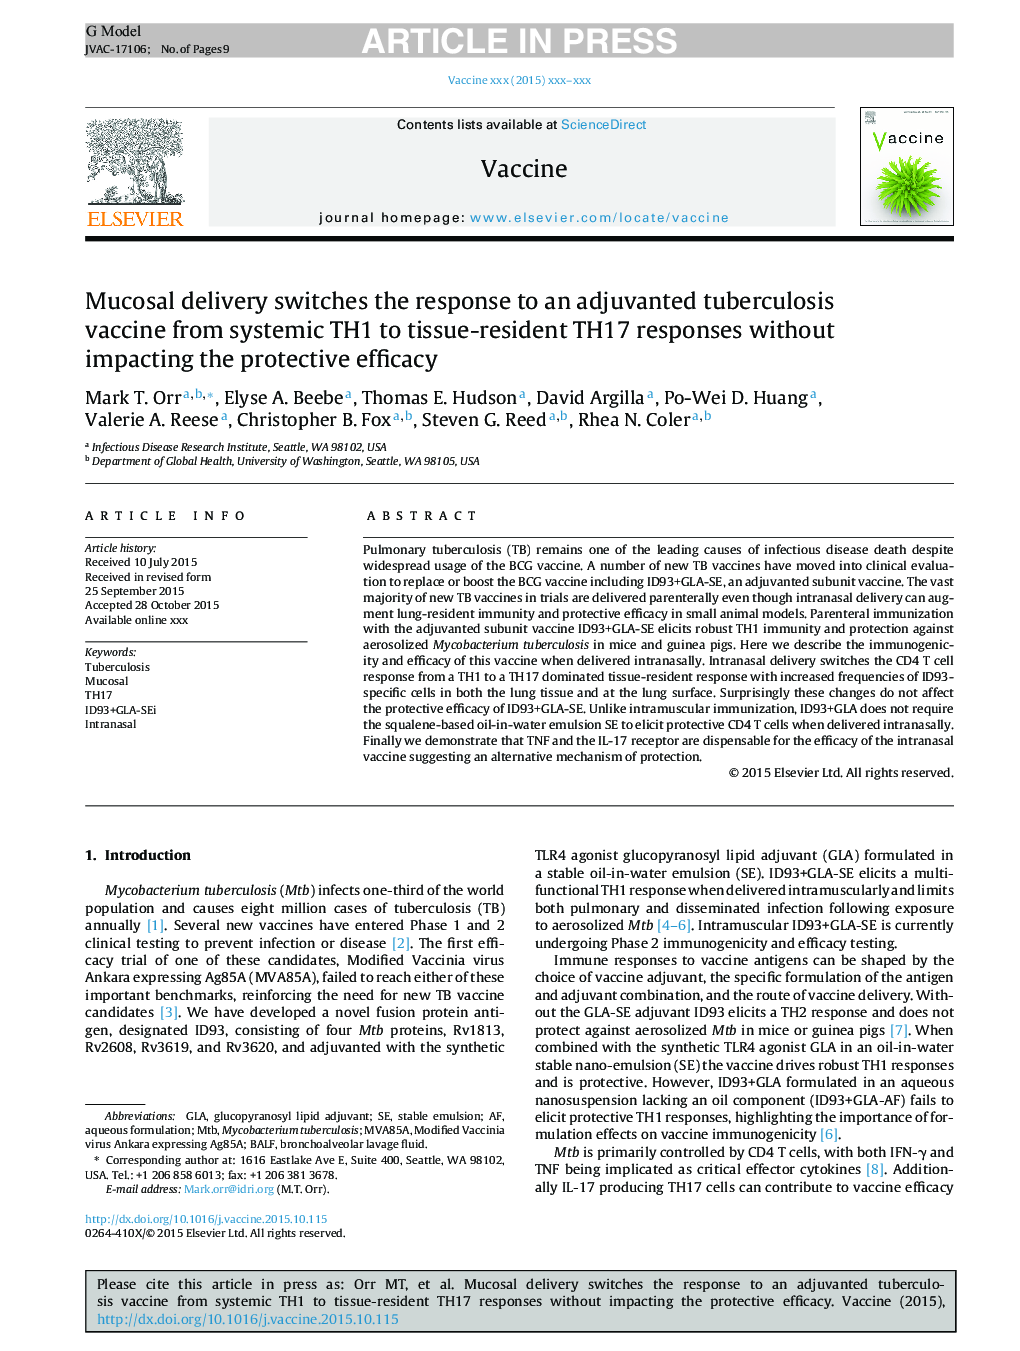 Mucosal delivery switches the response to an adjuvanted tuberculosis vaccine from systemic TH1 to tissue-resident TH17 responses without impacting the protective efficacy